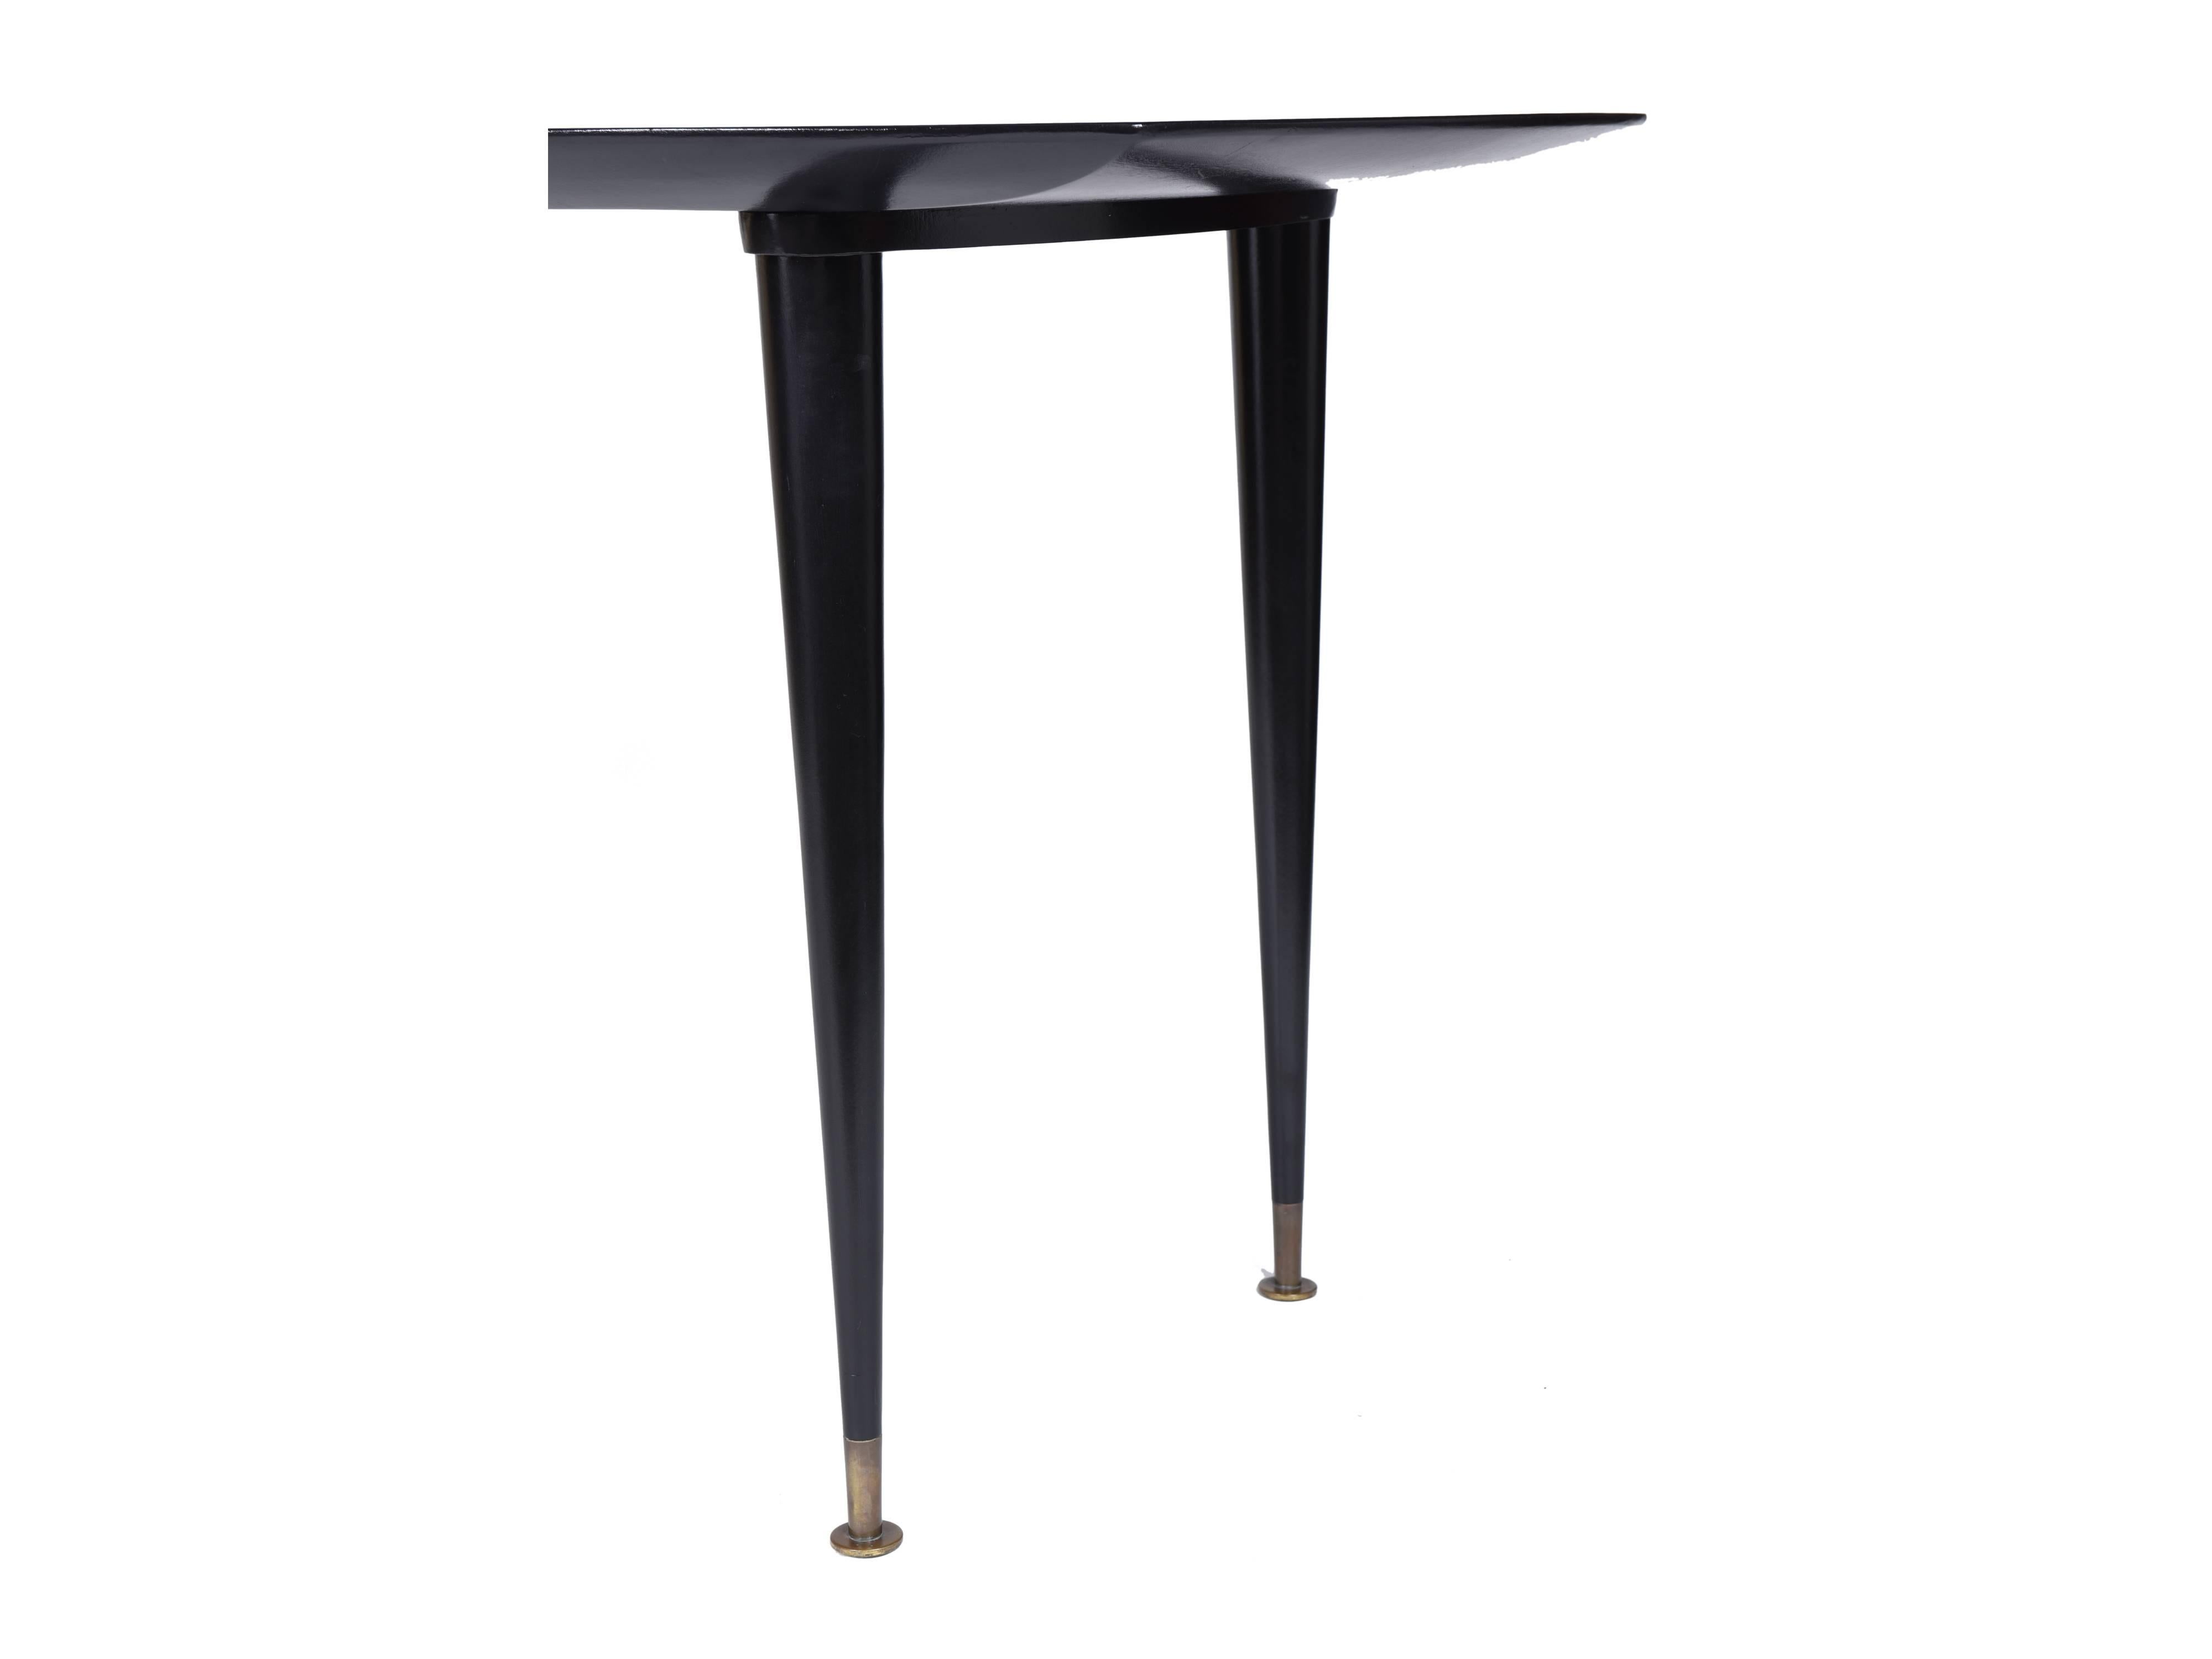 Brazilian Giuseppe Scapinelli Midcentury brazilian Dining Table in Black Lacquered Wood